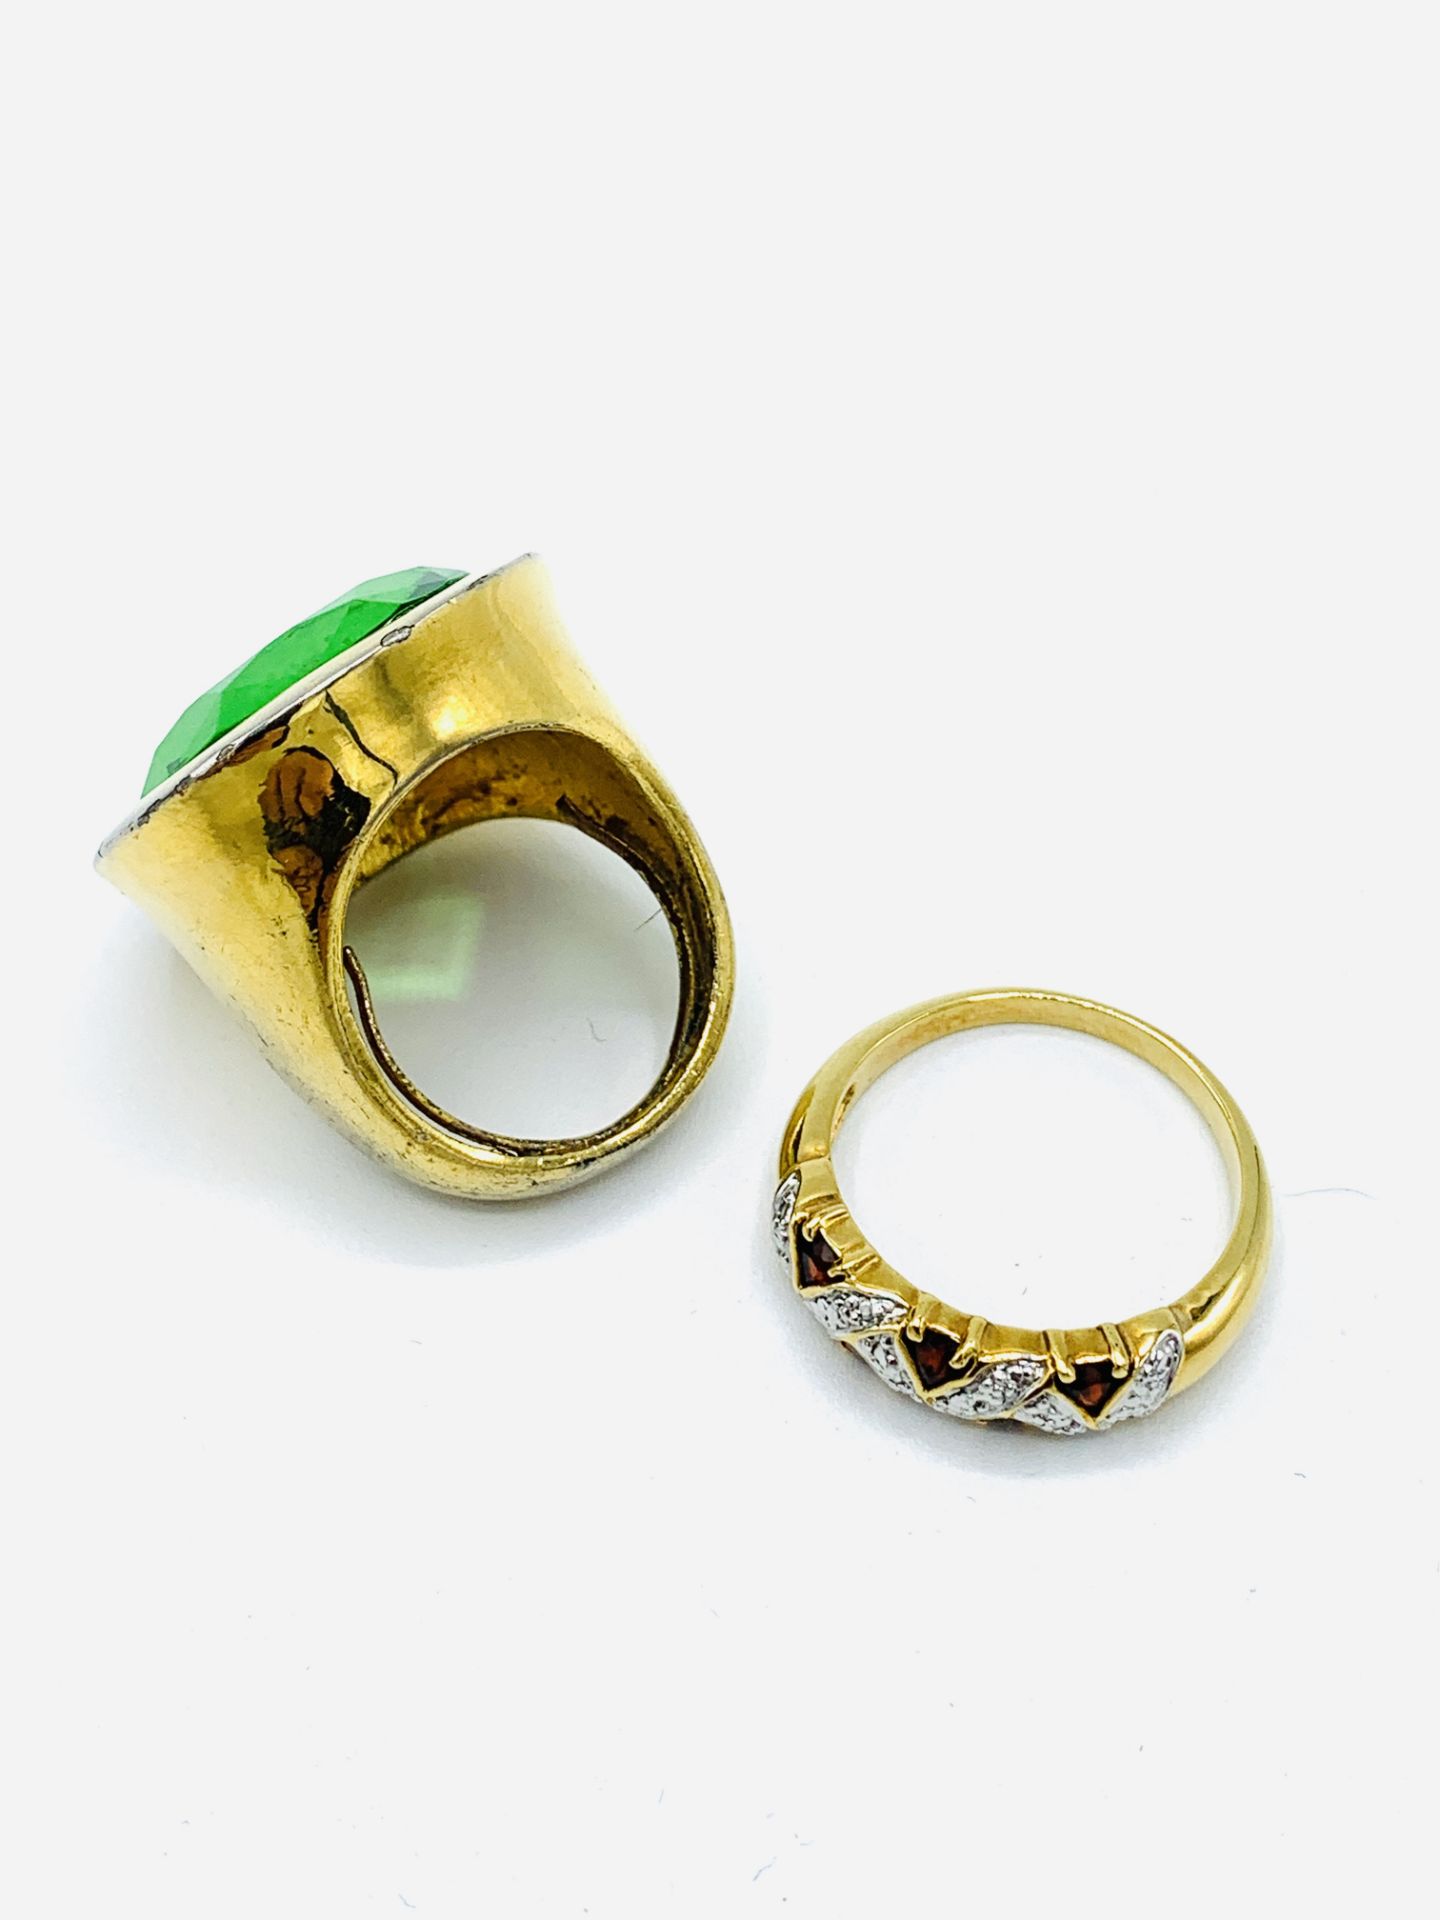 Two fashion rings - Image 3 of 3